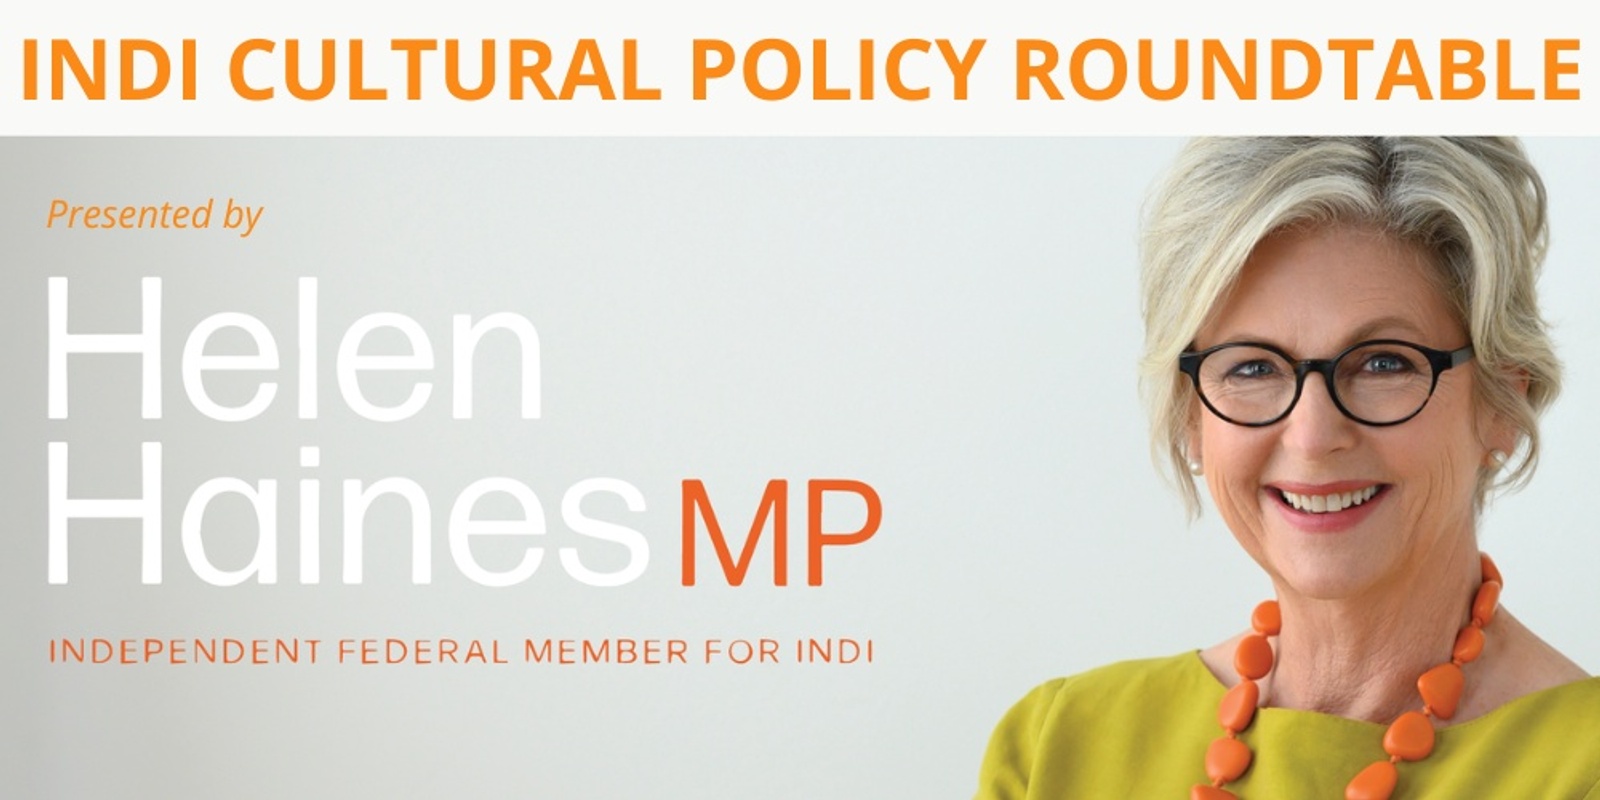 Banner image for Indi Cultural Policy Roundtable